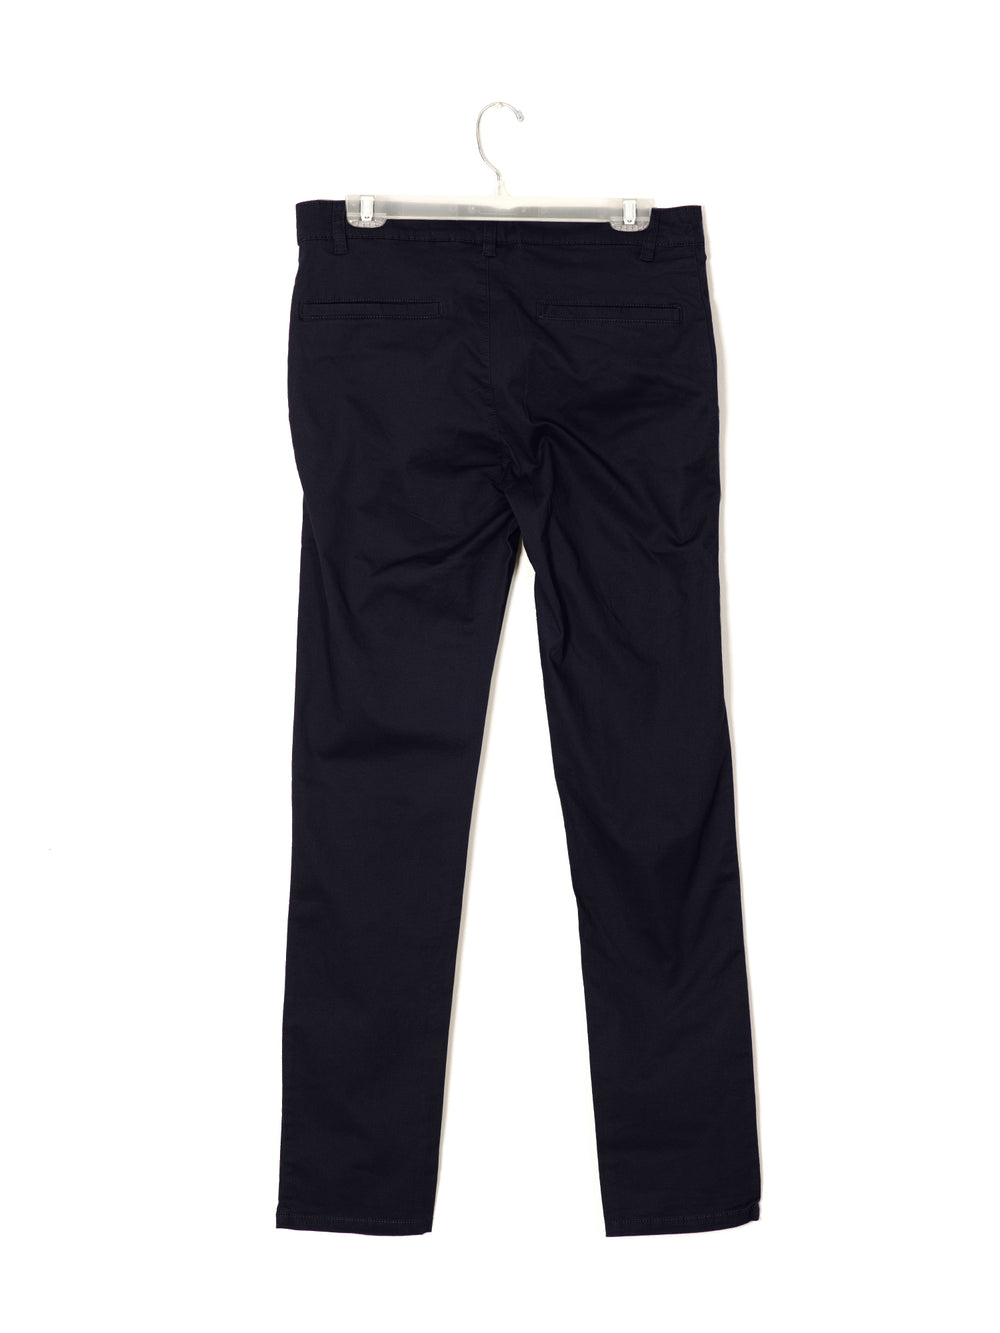 TAINTED SLIM CHINO - NAVY - CLEARANCE